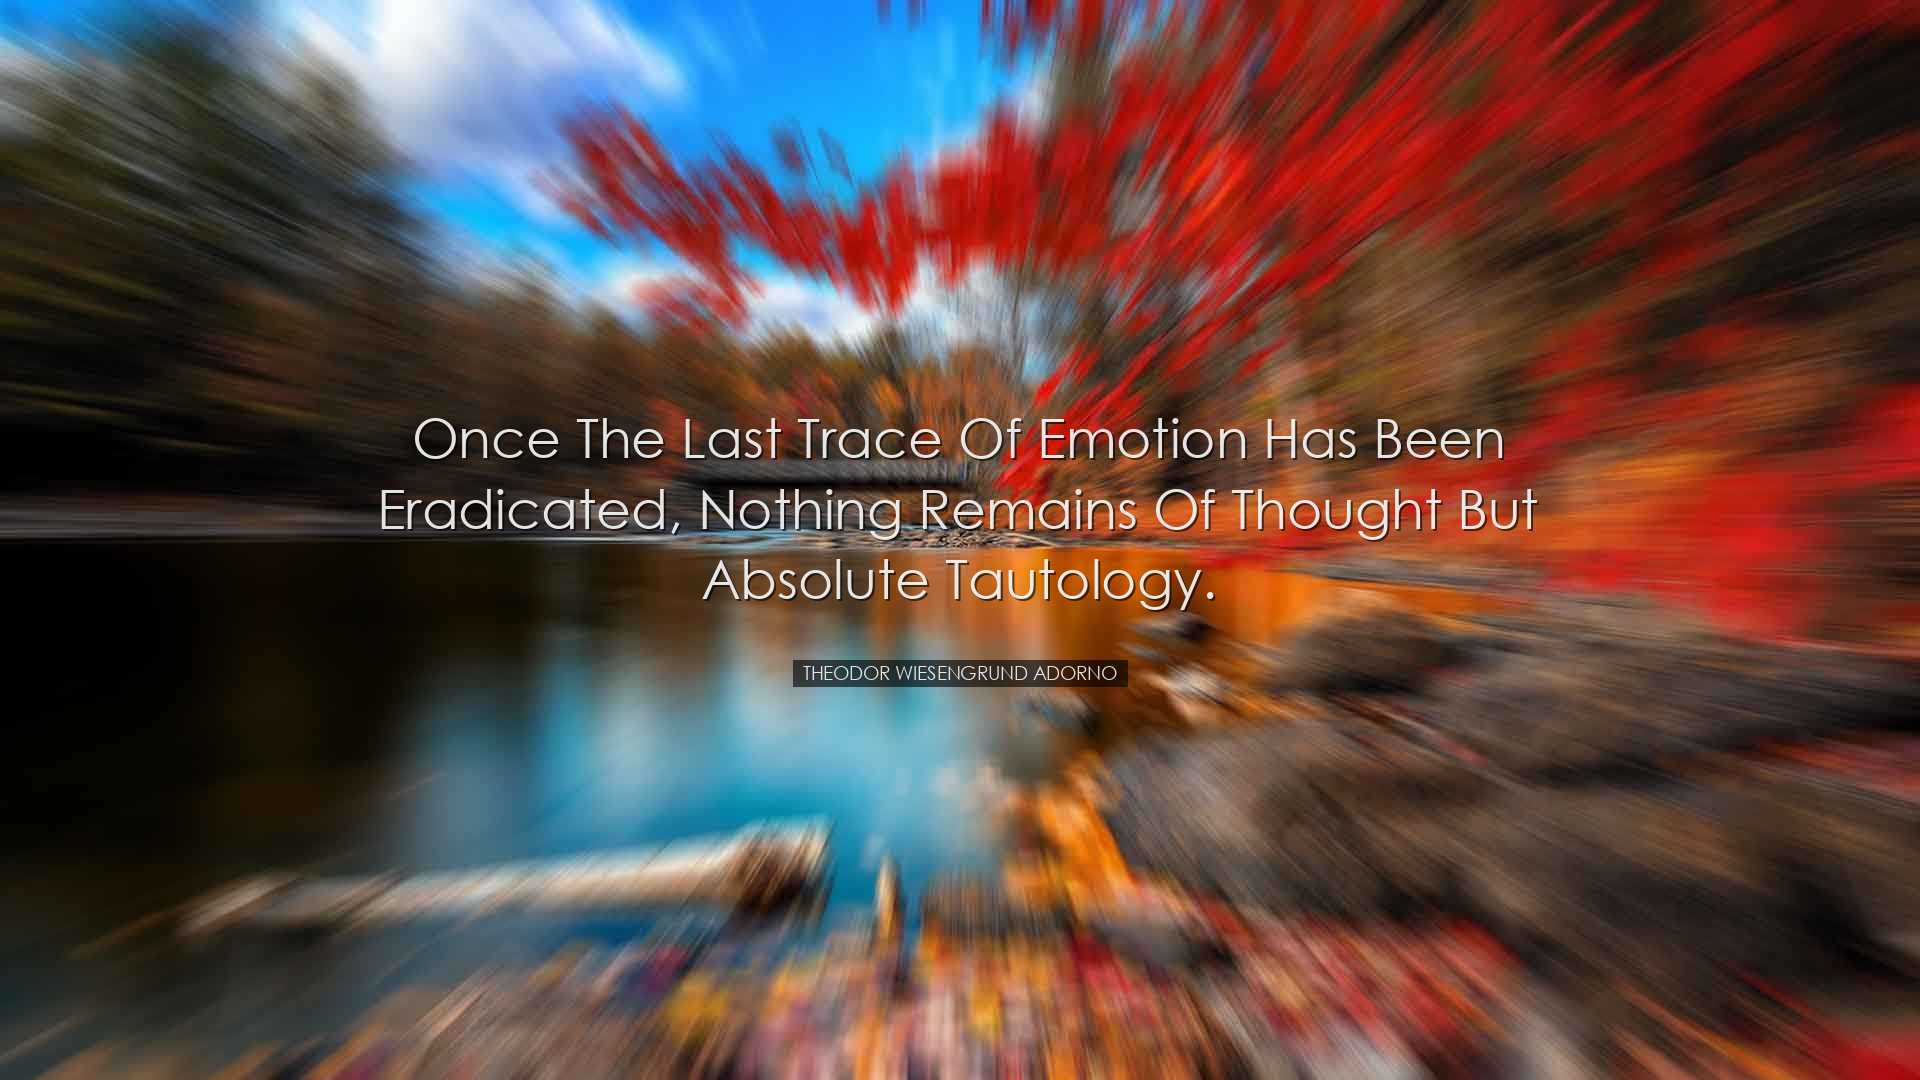 Once the last trace of emotion has been eradicated, nothing remain